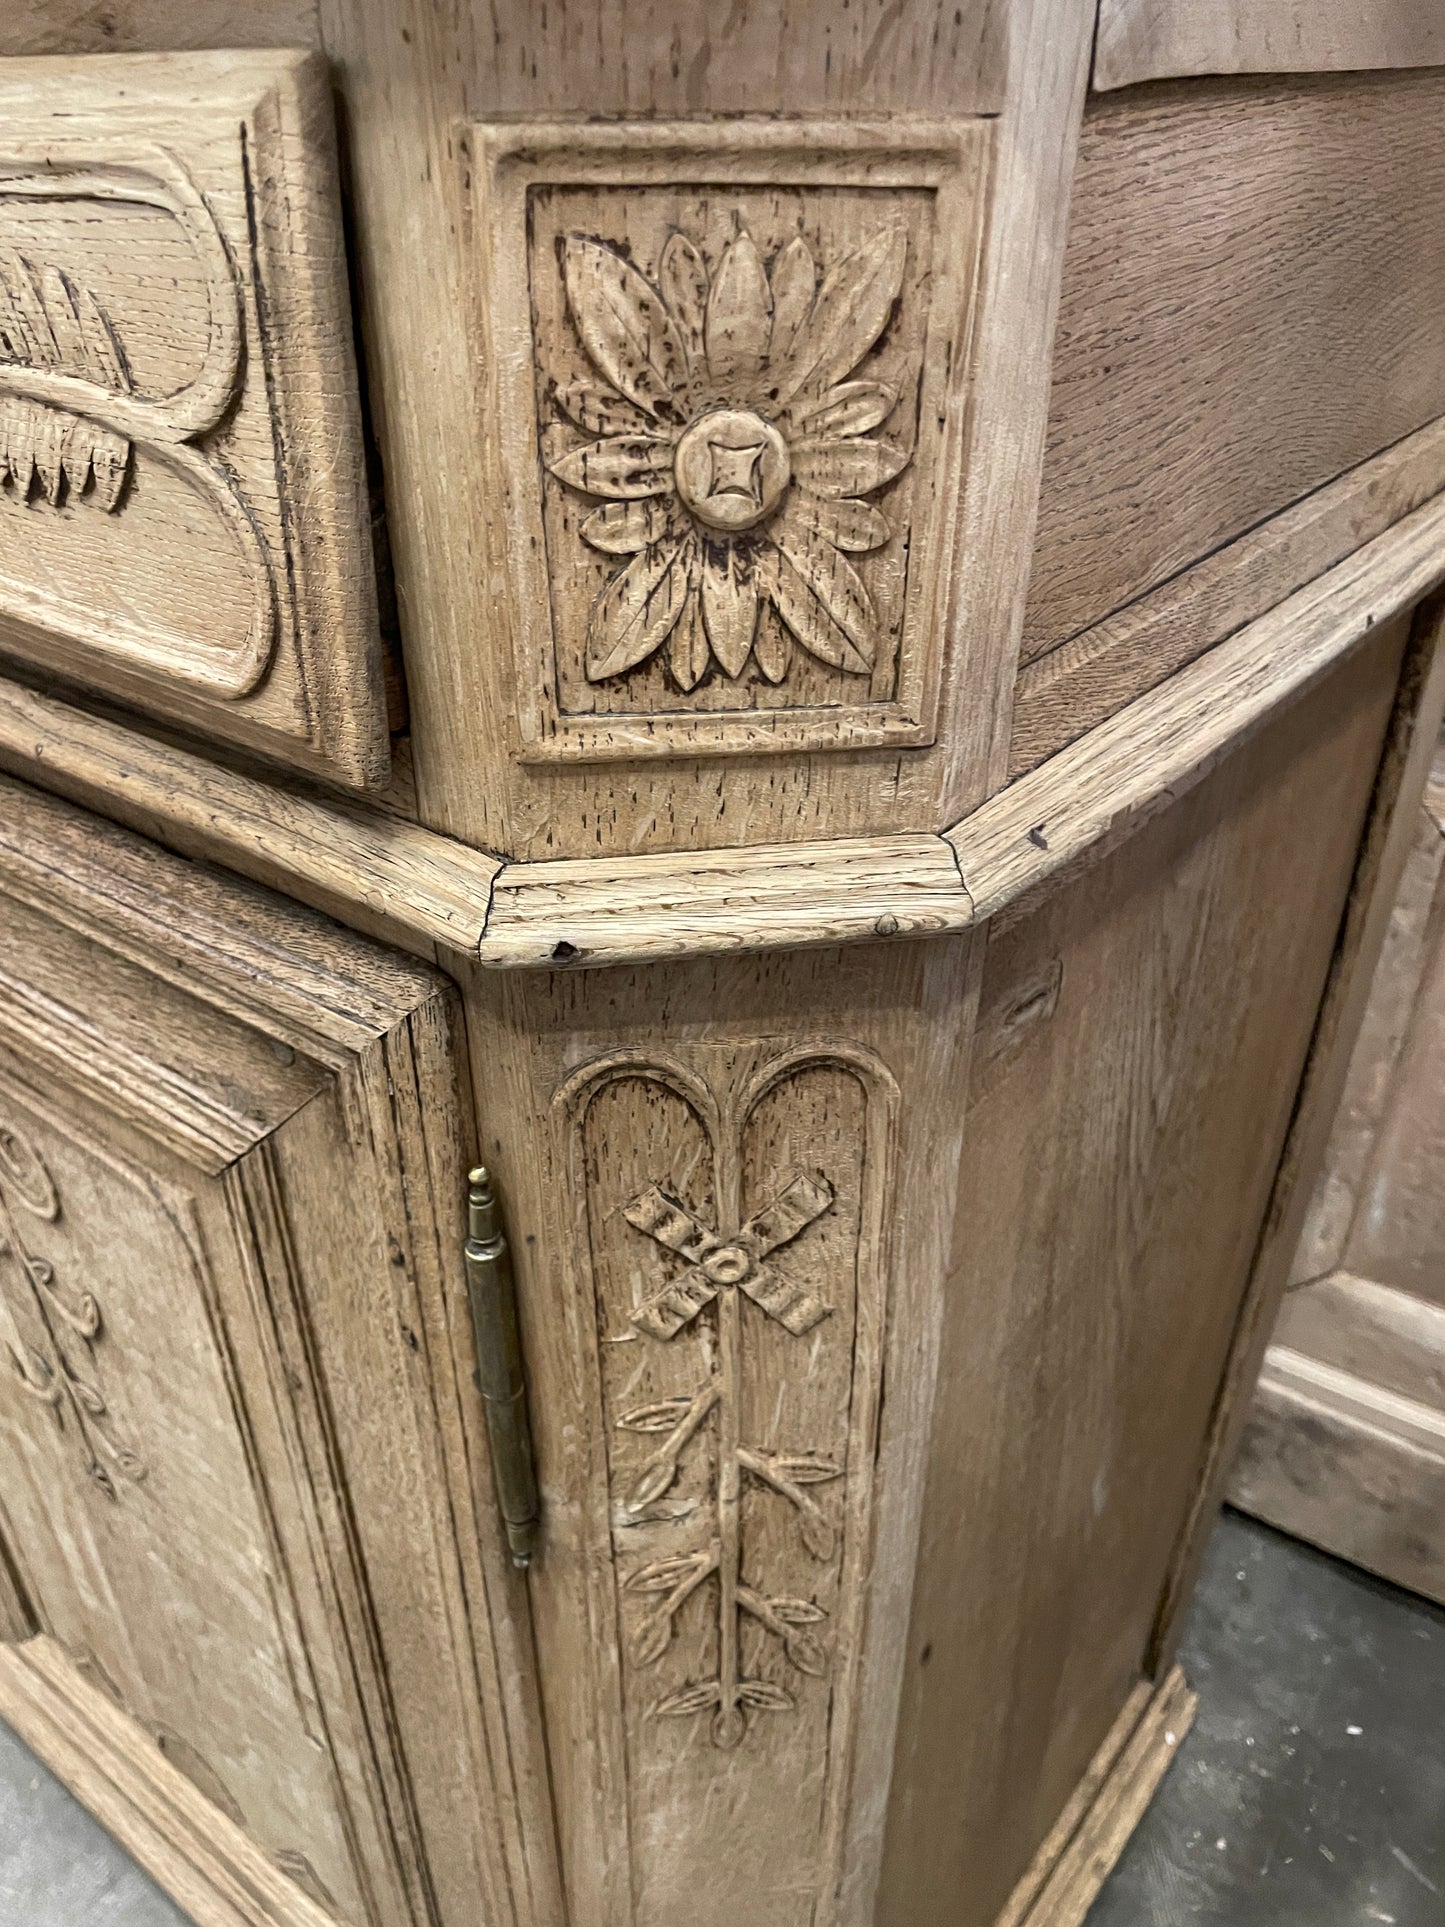 Bleached French Antique Sideboard